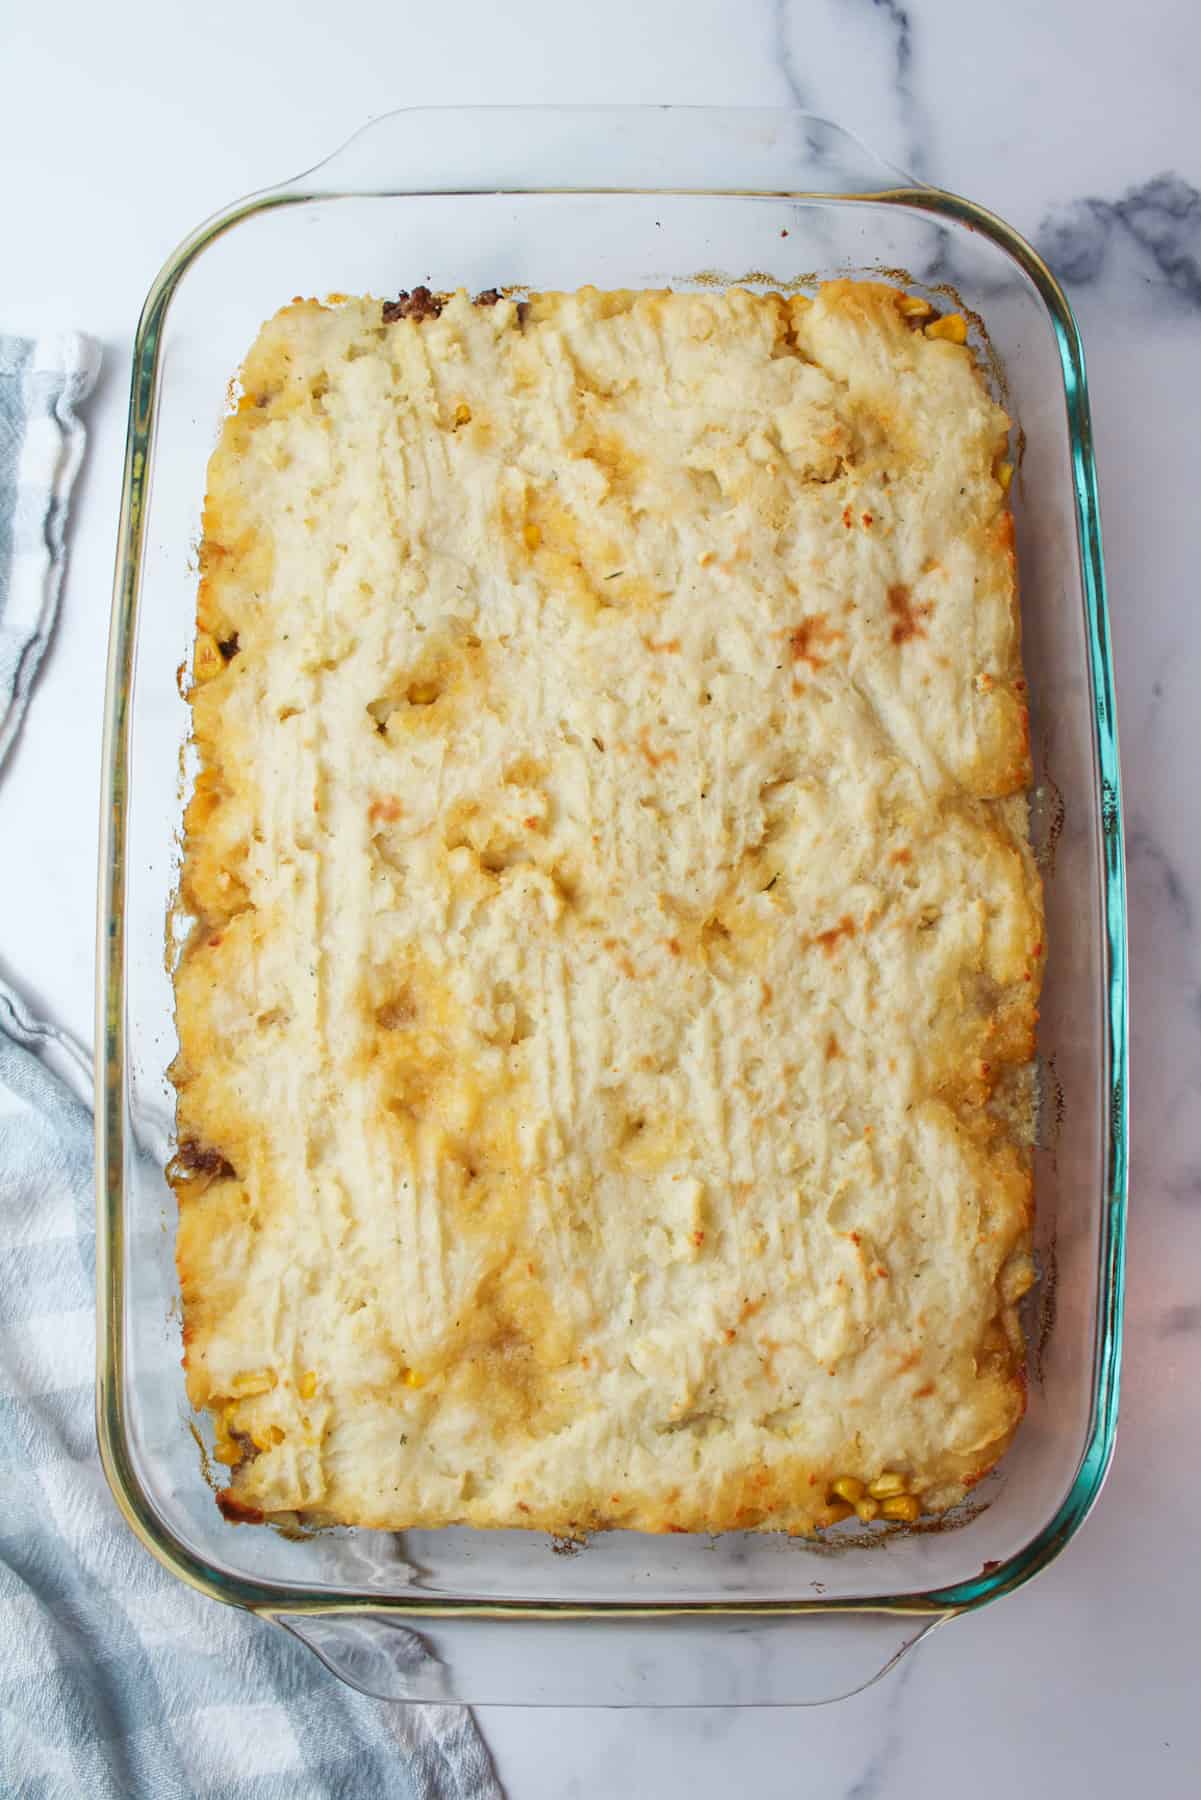 cooked Shepherds pie with instant mashed potatoes in a glass baking dish